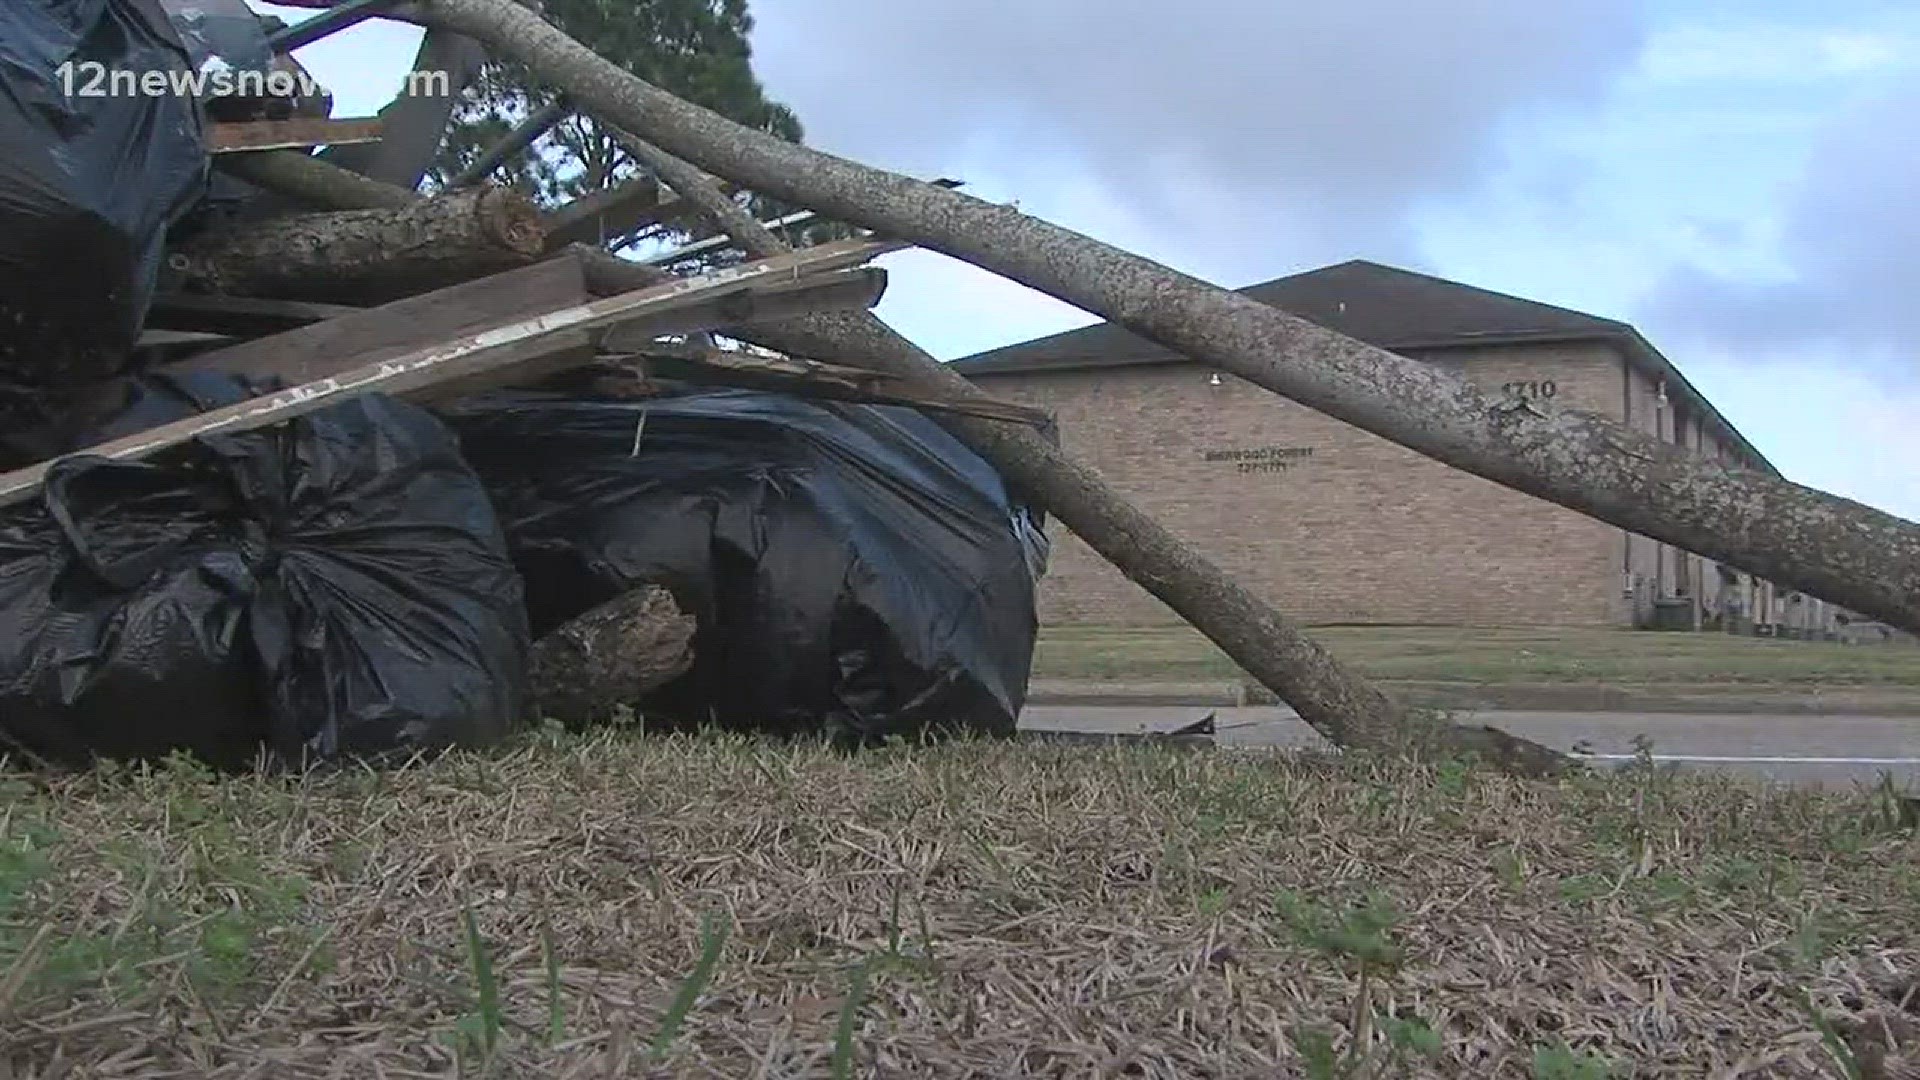 A Port Arthur man says a pile of debris along Jimmy Johnson boulevard has not been picked up in months